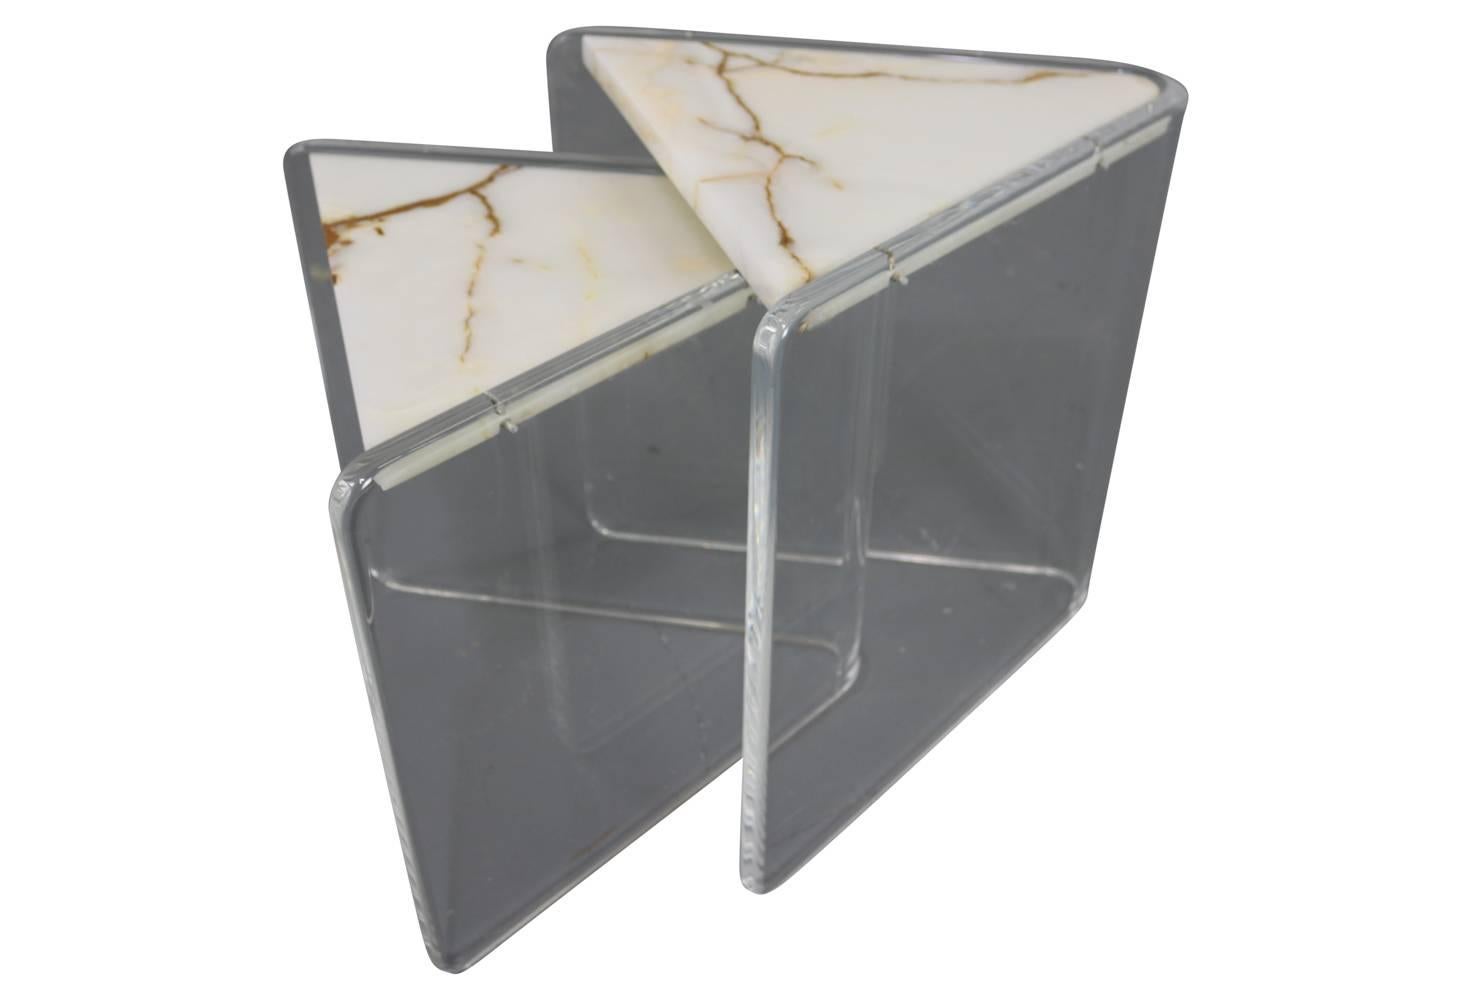 Colombian Pair of Enrique Garcel Marble and Lucite Stacking Triangle Tables